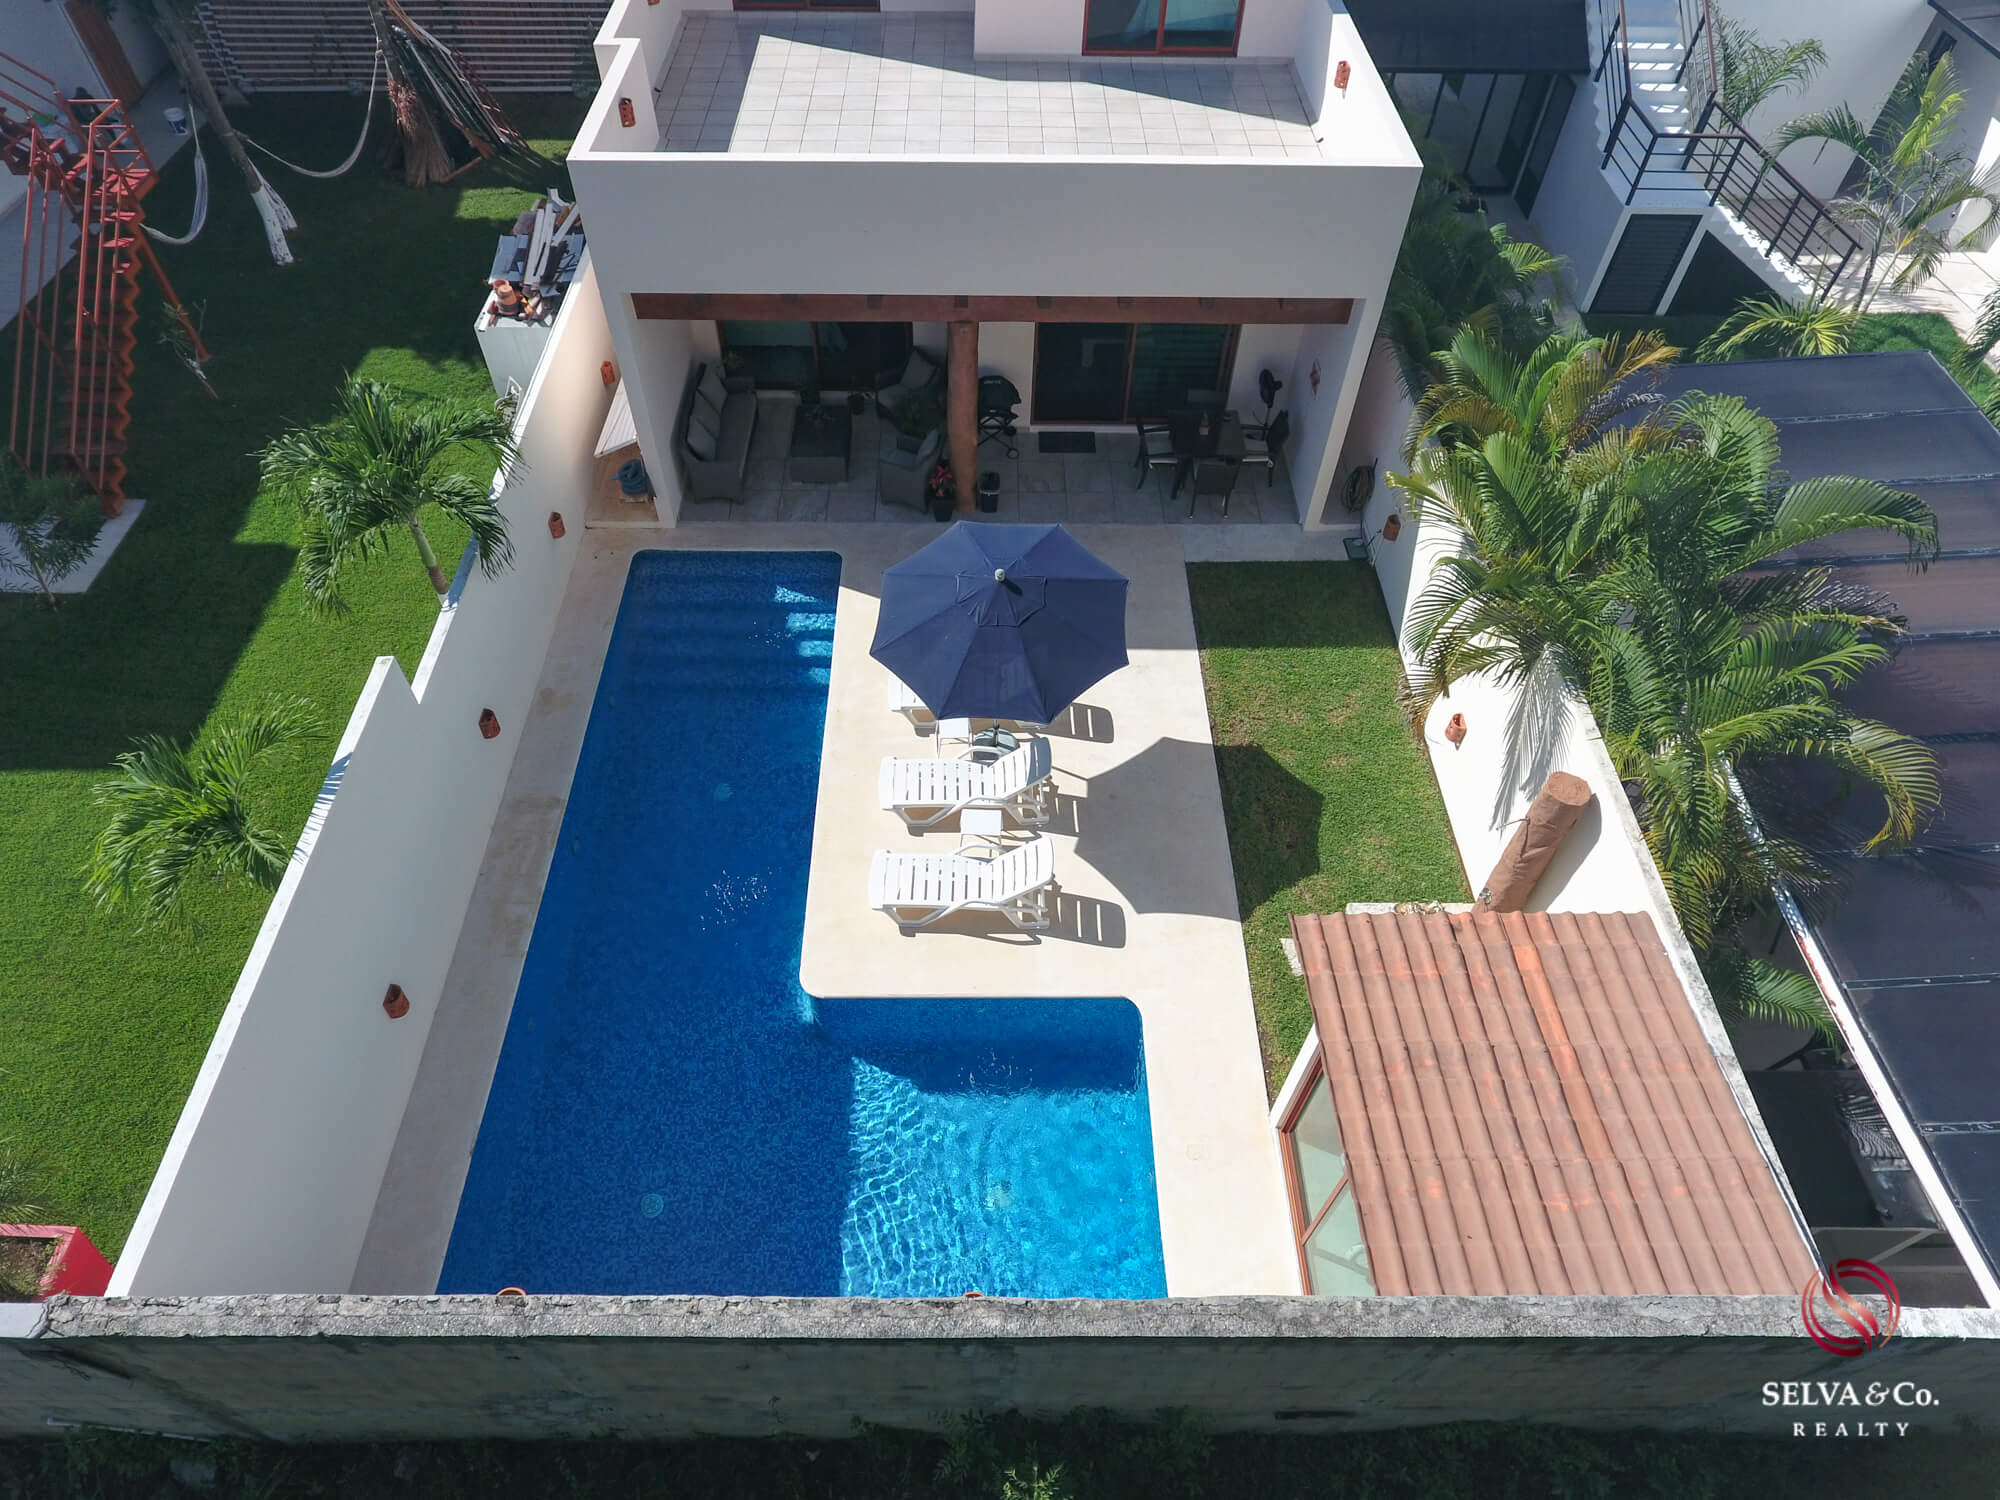 3 bedroom house in Playacar, pool with swimming lane, wading pool, terrace overlooking the pool, for sale, Playa del Carmen.